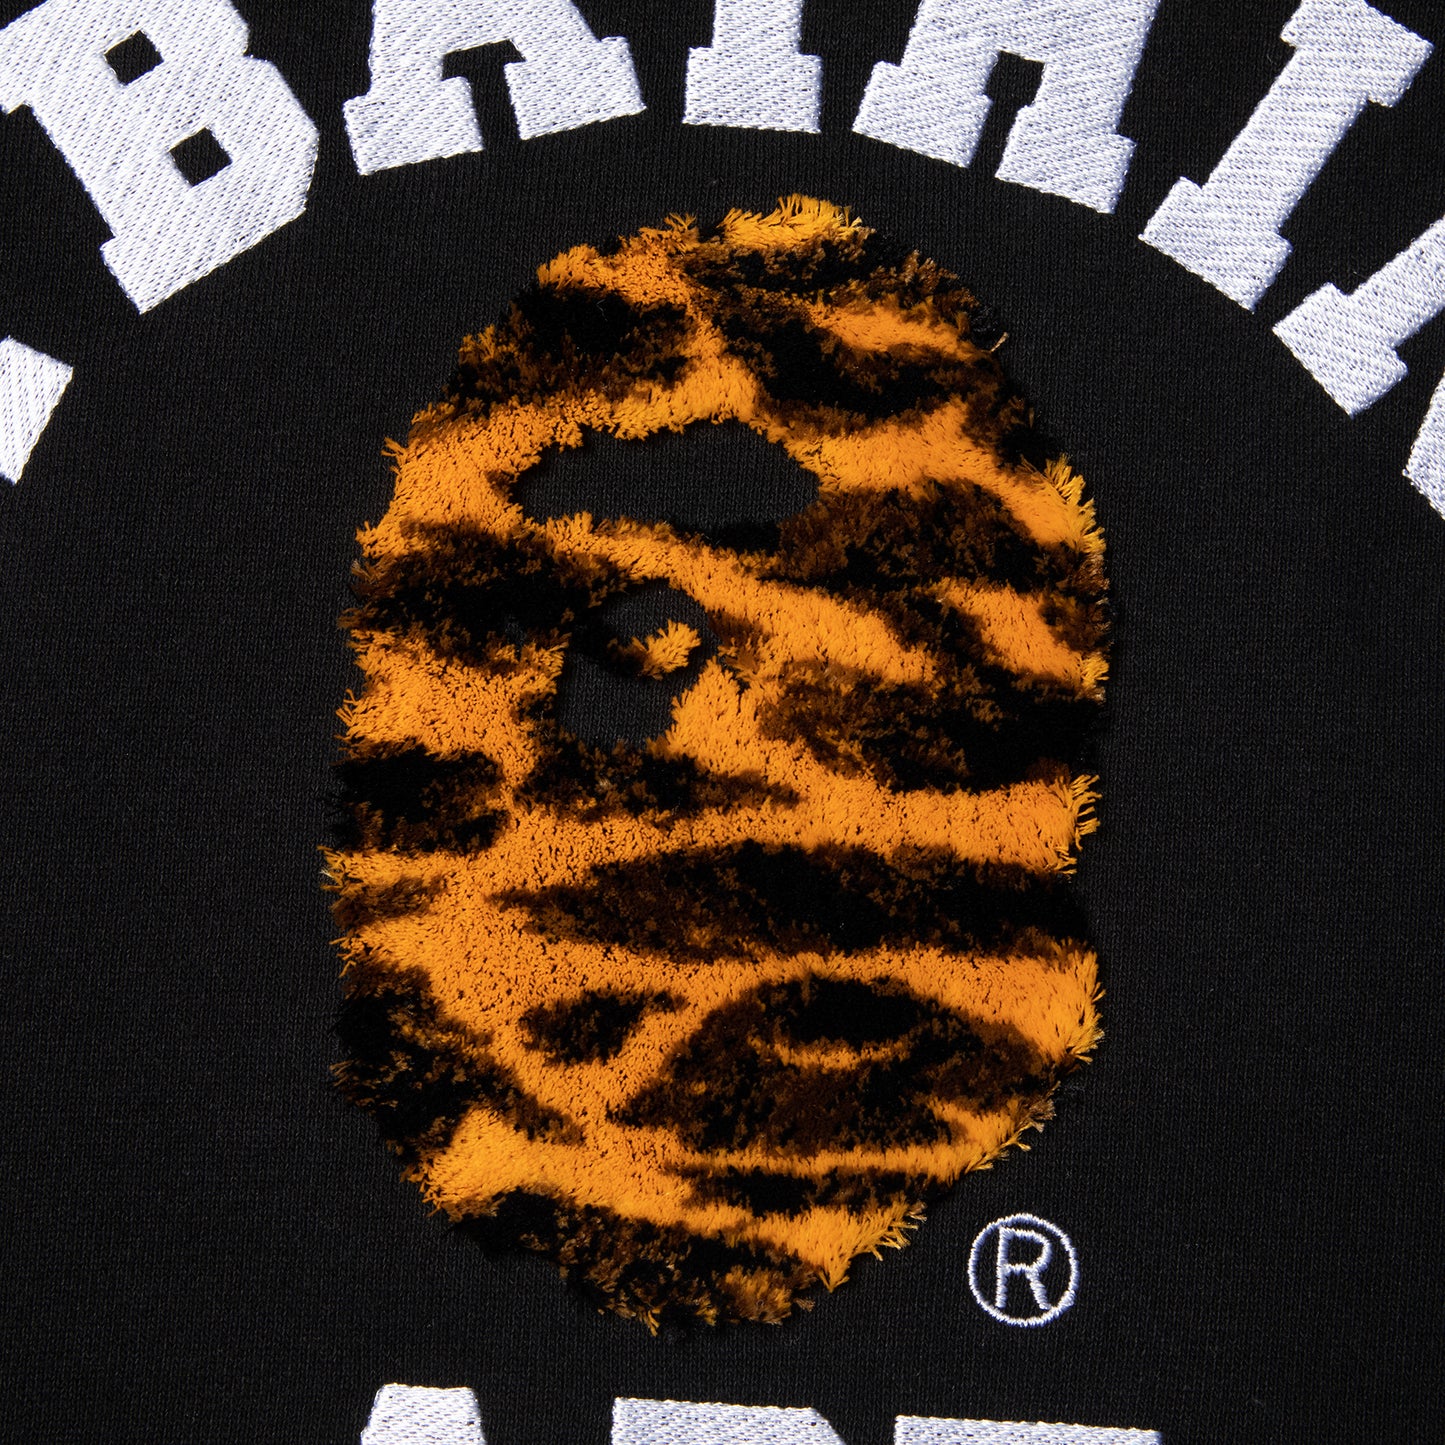 A Bathing Ape Tiger Camo College Relaxed Fit Crewneck (Black)